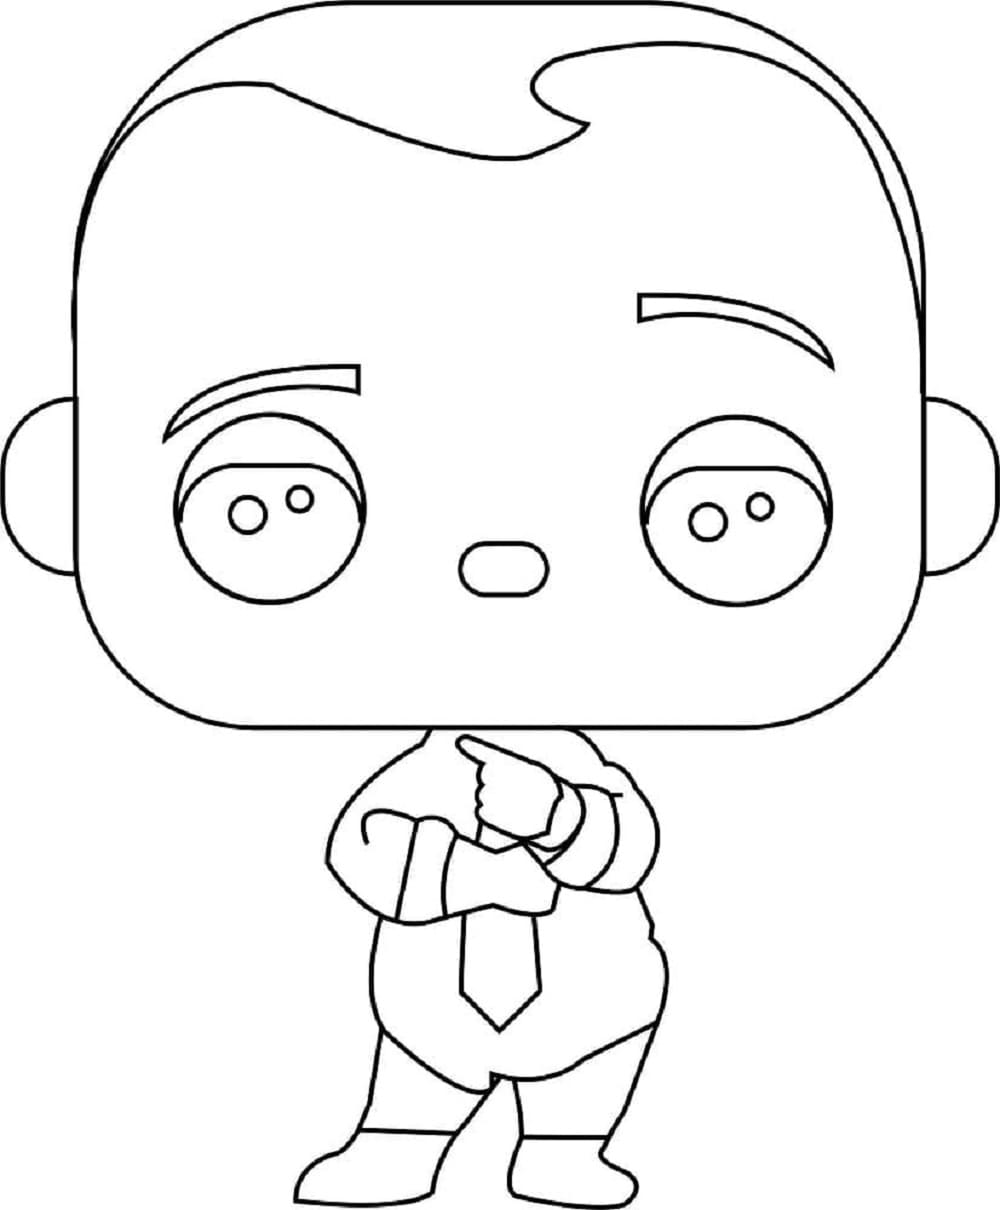 Printable Funko Pop Boss Baby Coloring Page